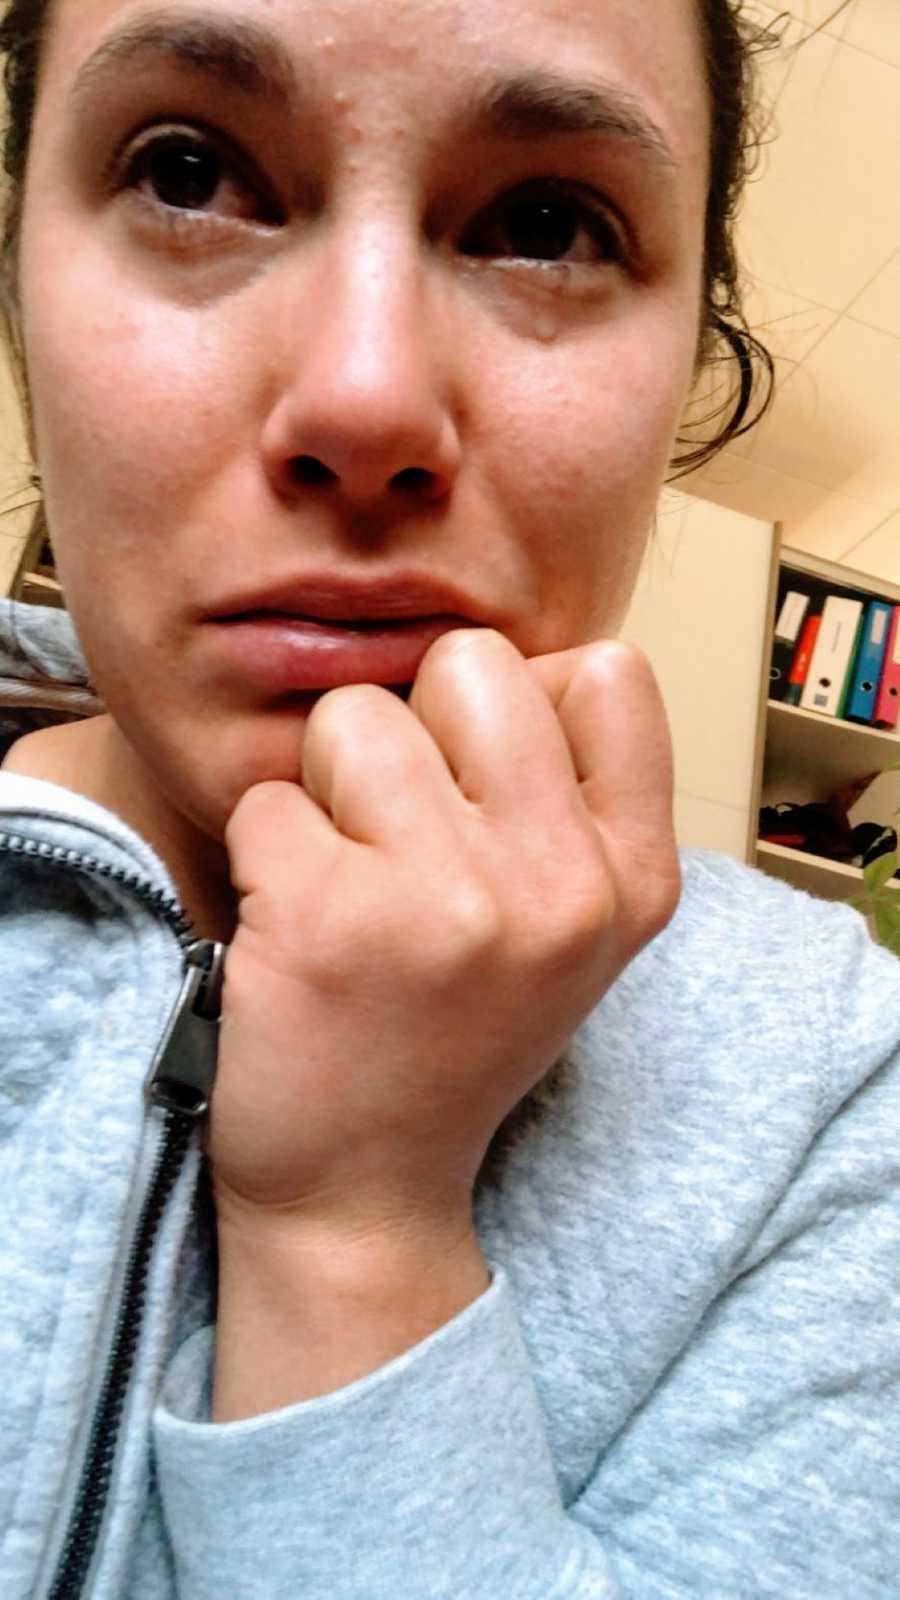 Woman with Epstein-Barr Virus cries while trying to concentrate on homework